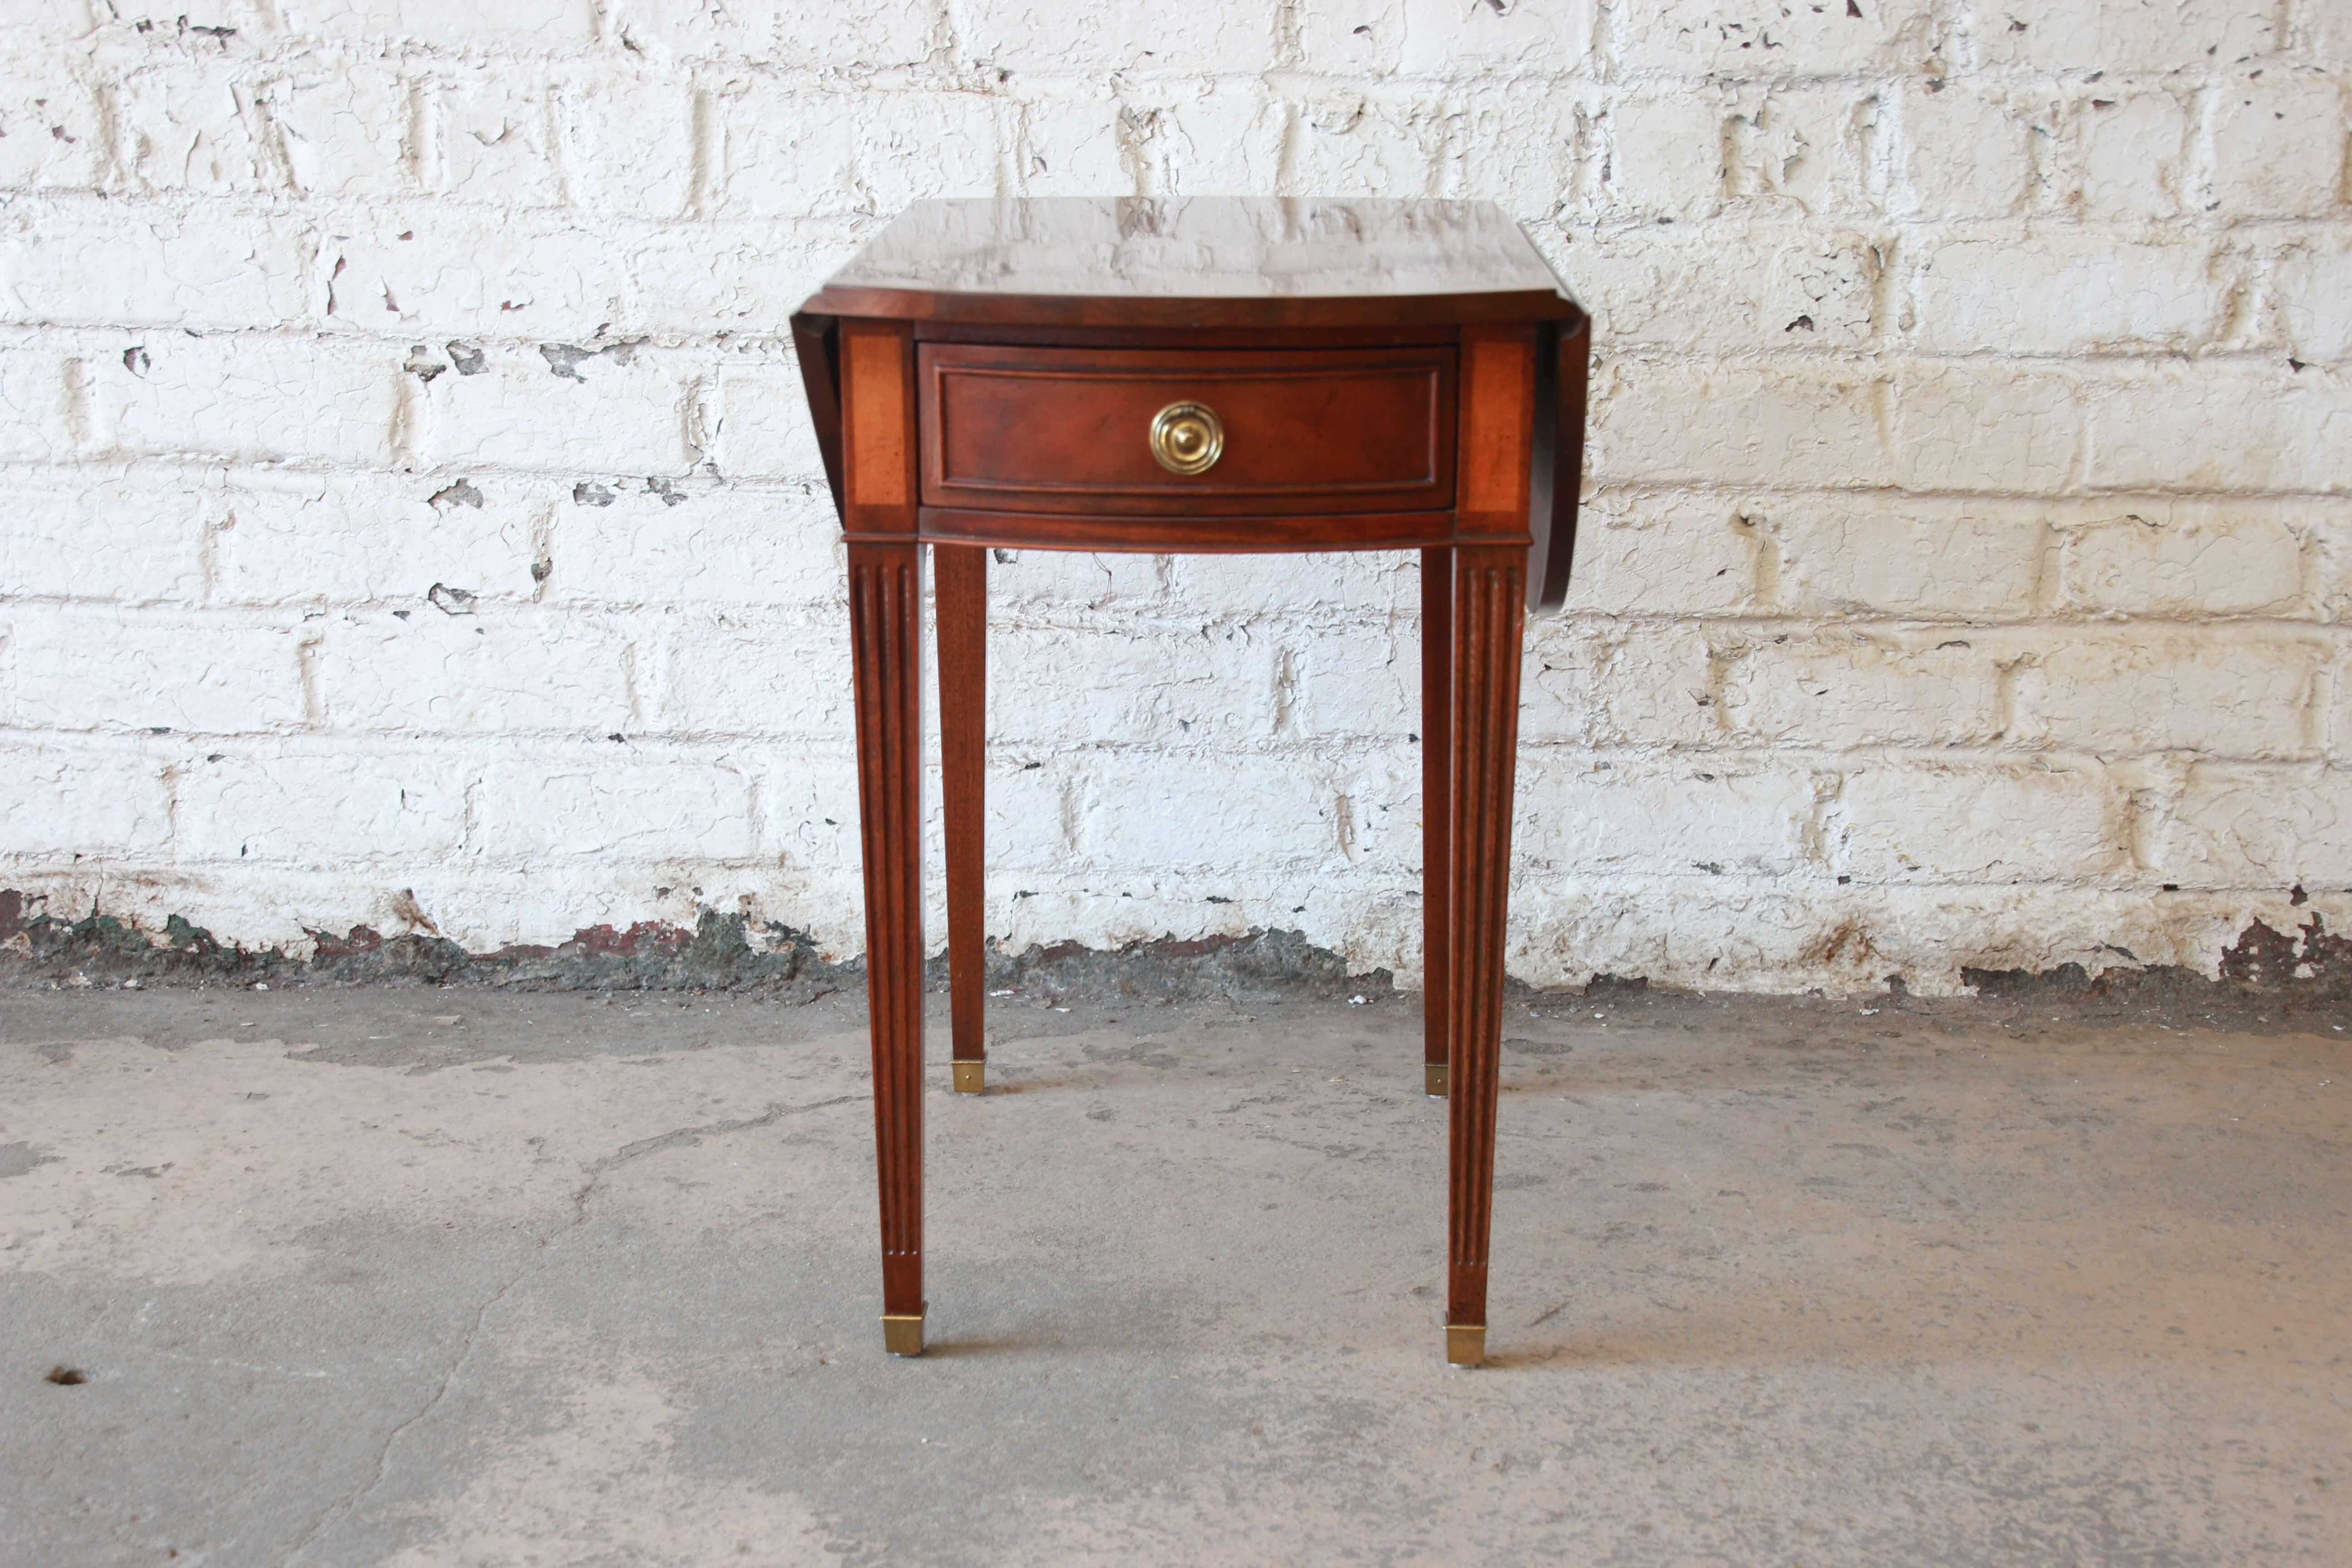 Offering a very nice mahogany and satinwood inlaid drop-leaf side table by Baker Furniture. The table has tapered legs with brass details at the feet. The table has a smooth sliding drawer and round brass pull. Each side has a drop-leaf that